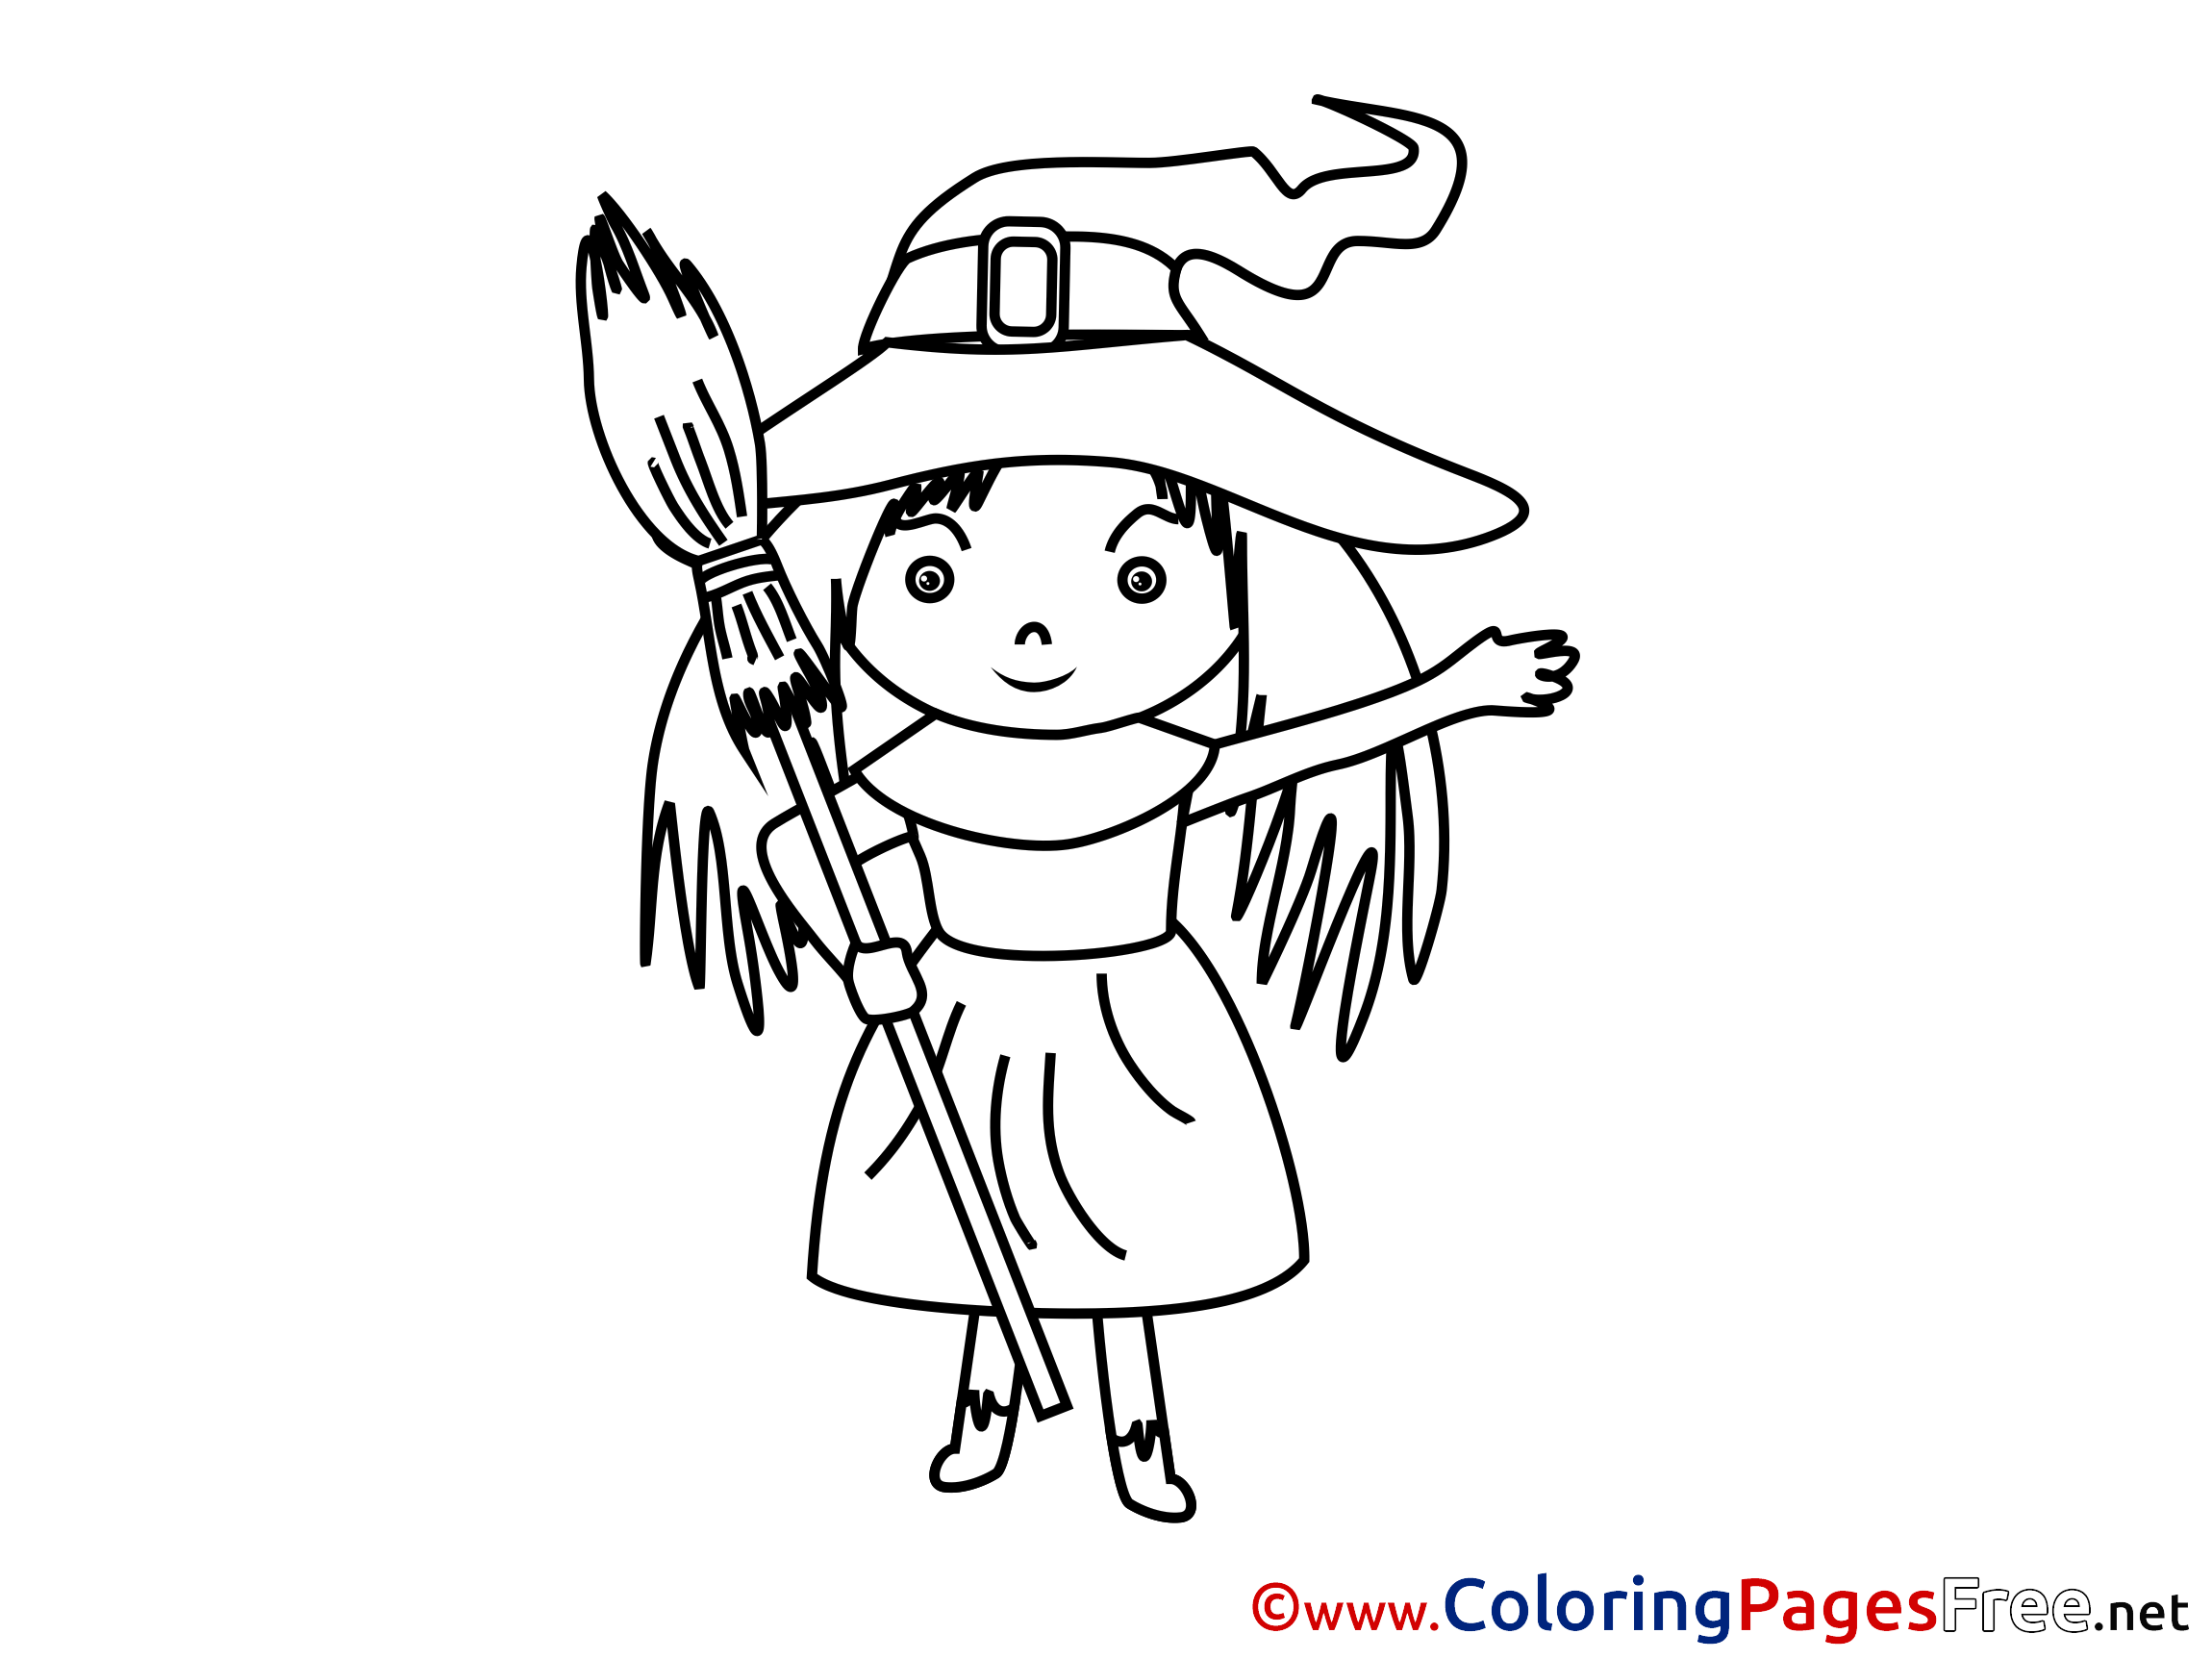 Broom for Kids Halloween Colouring Page